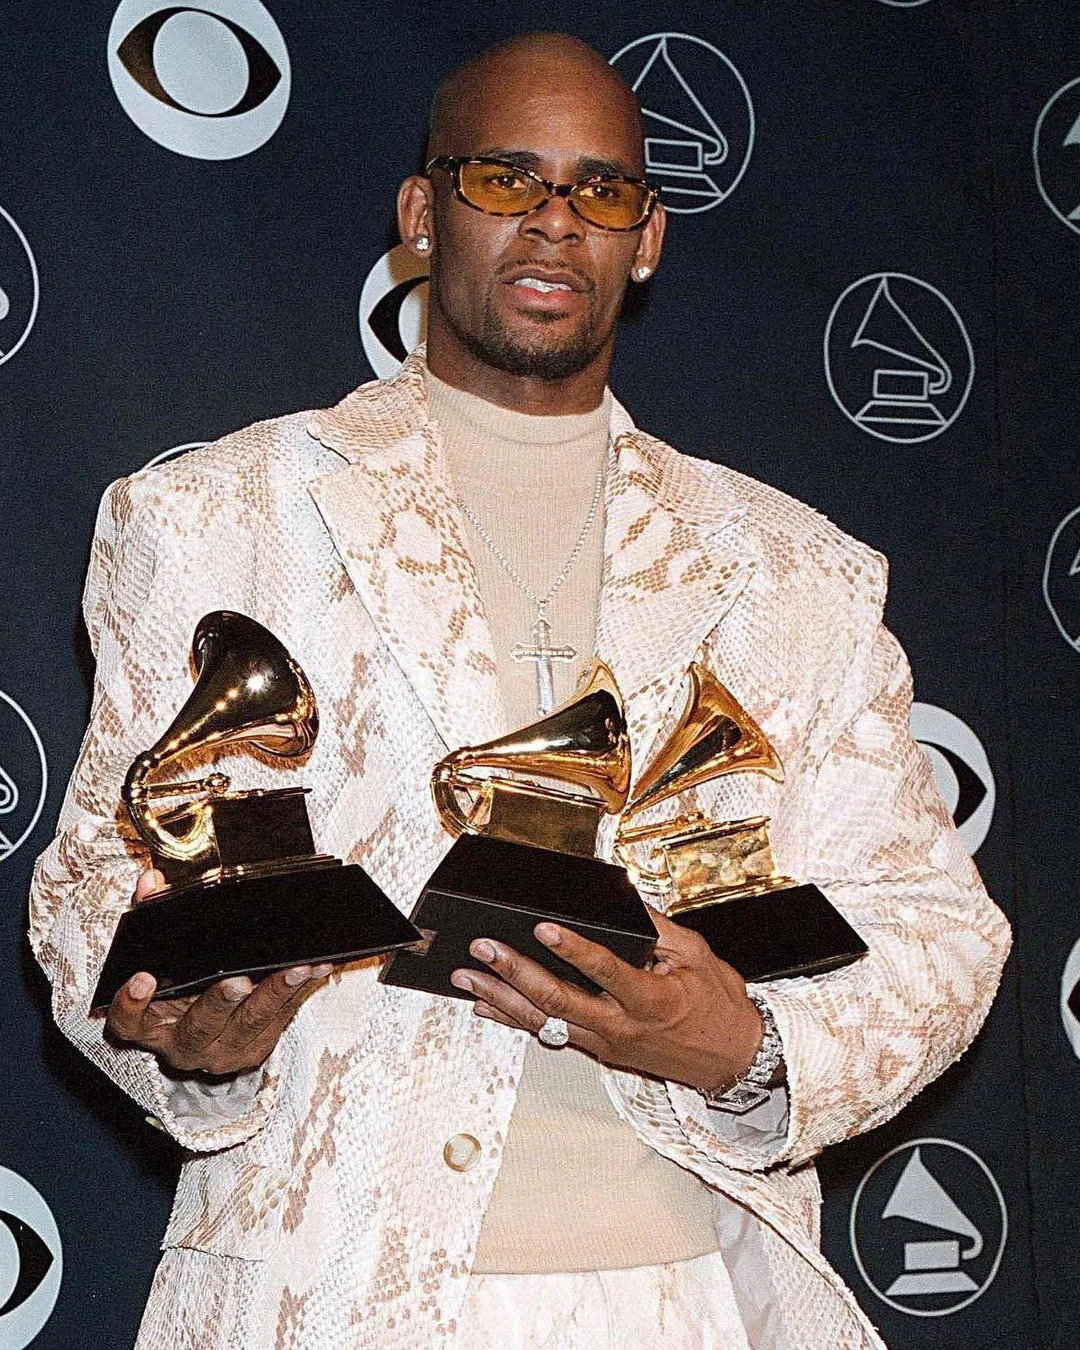 R. Kelly poses for the press holding his three Grammy awards at the Radio City Music Hall, New York